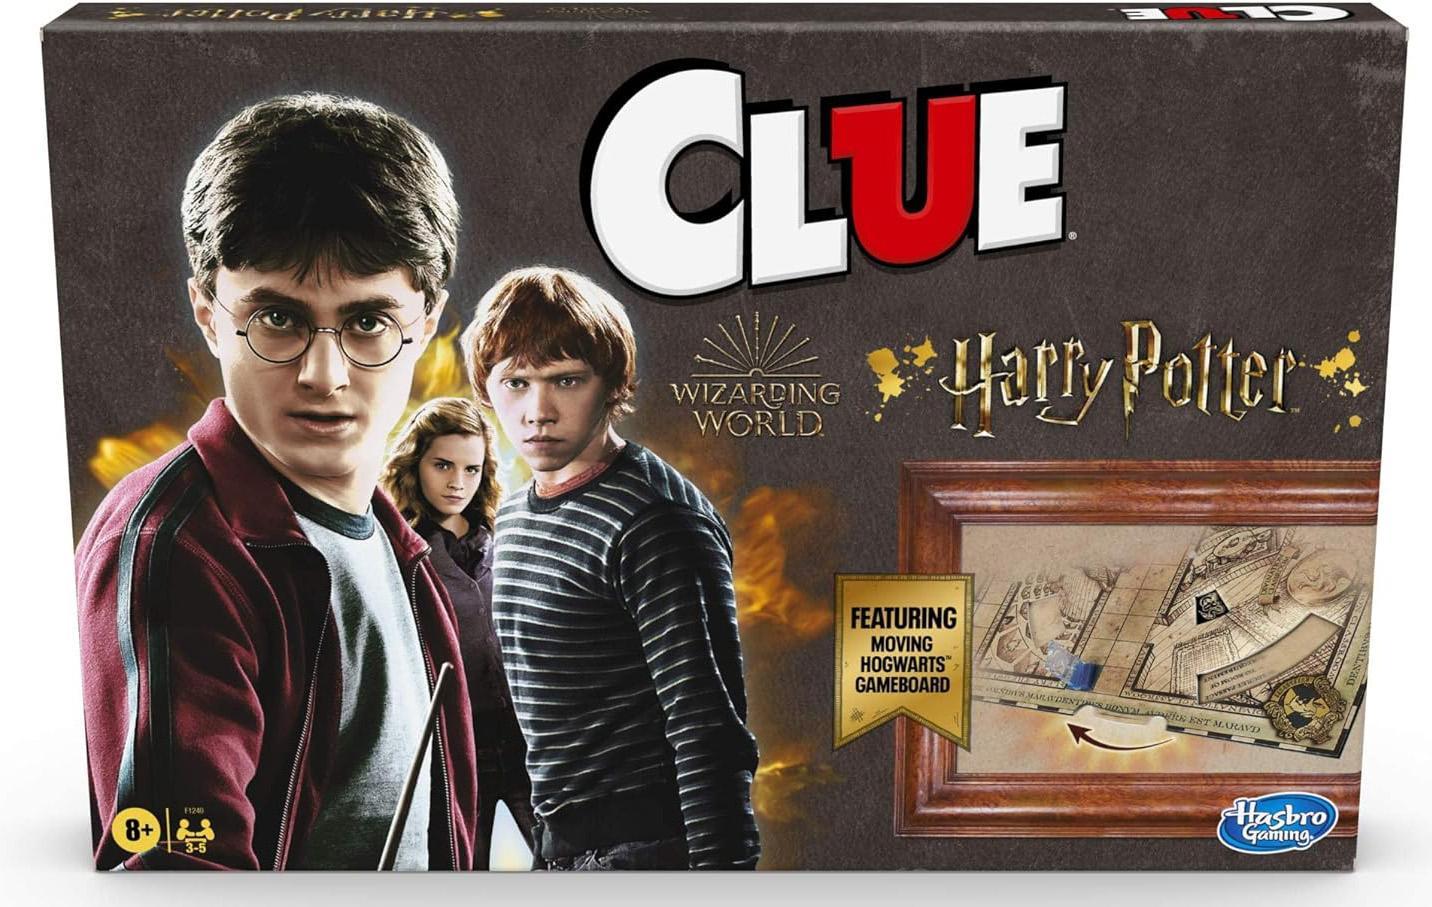 Clue Wizarding World Harry Potter Edition Board Game for $26.99 Shipped